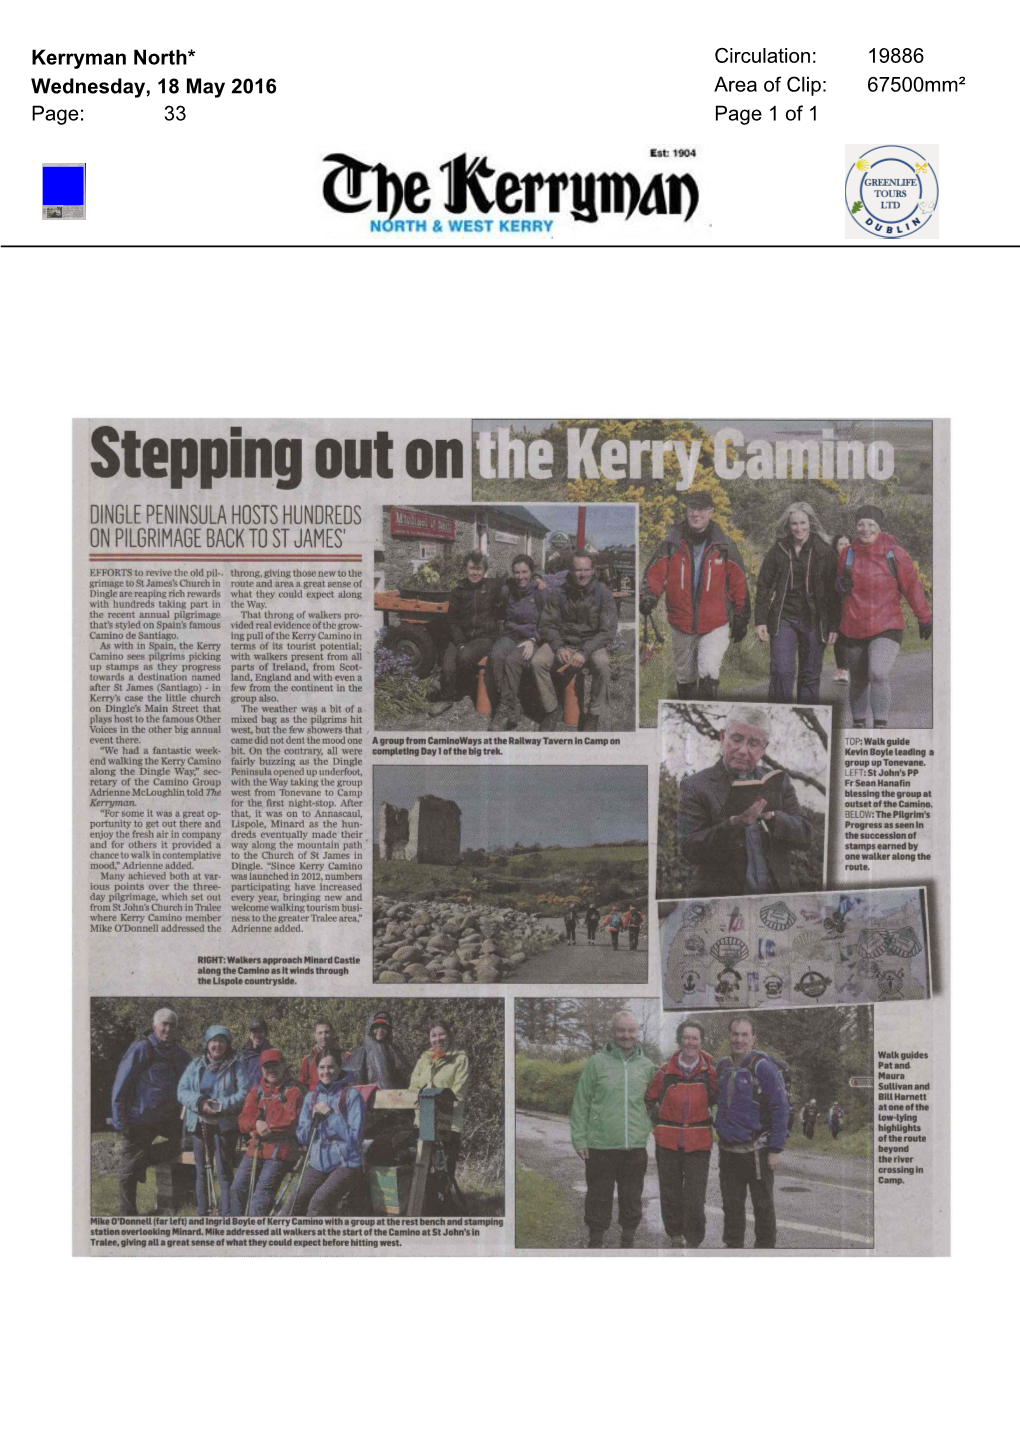 Stepping out on the Kerry Camino